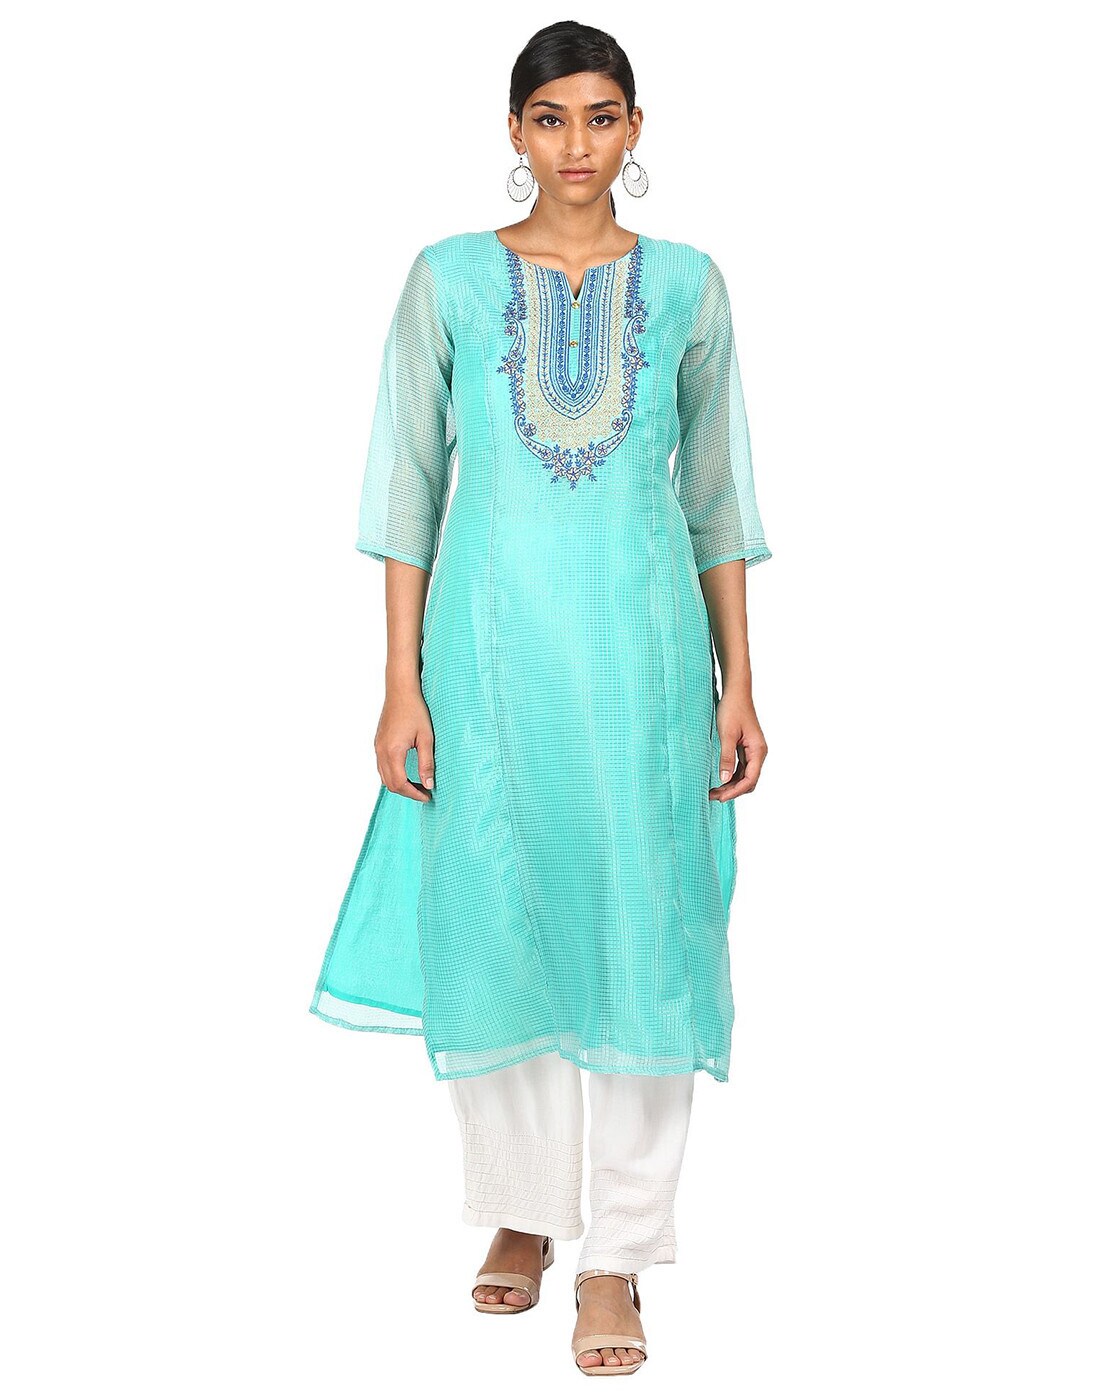 SMYLEE  ANAHI  HEAVY LINING RAYON KURTI WITH BOTTOM AND NET DUPATTA   S3FOREVER GUJARAT WHOLESALER AND DEALER